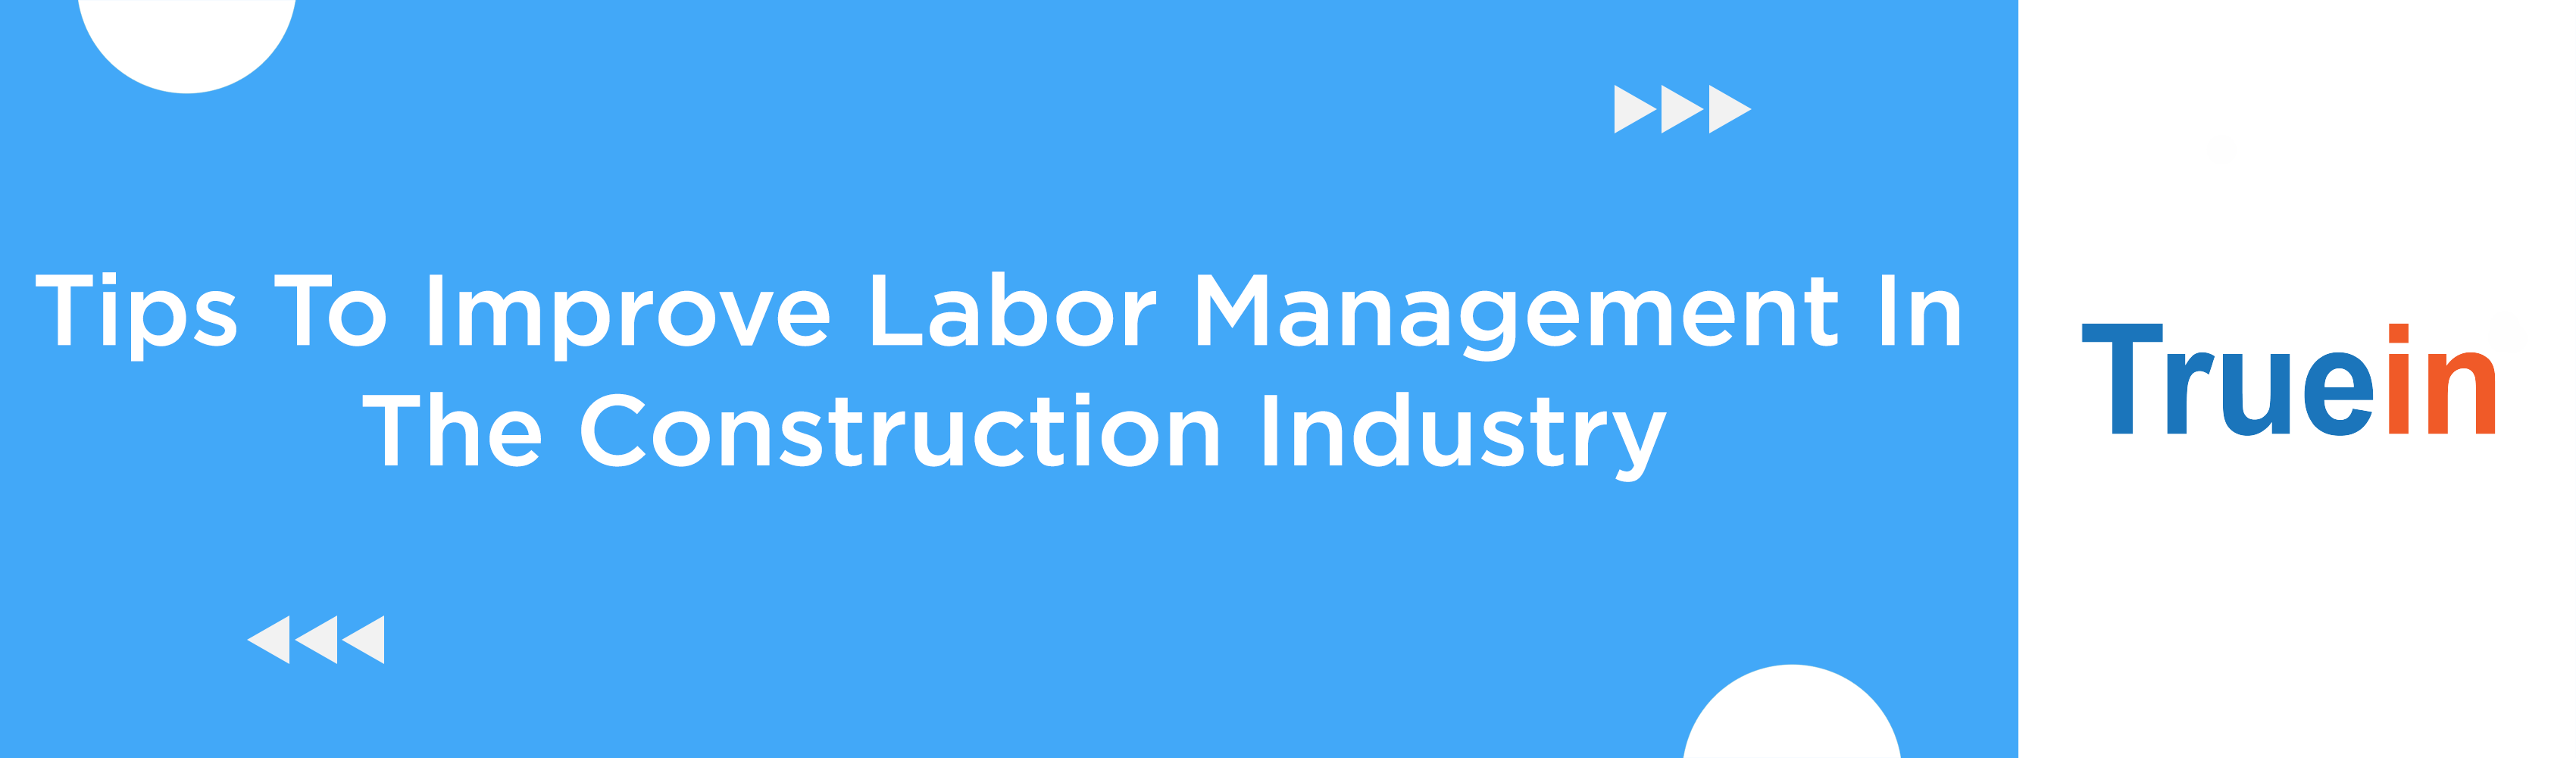 Tips To Improve Labor Management In The Construction Industry